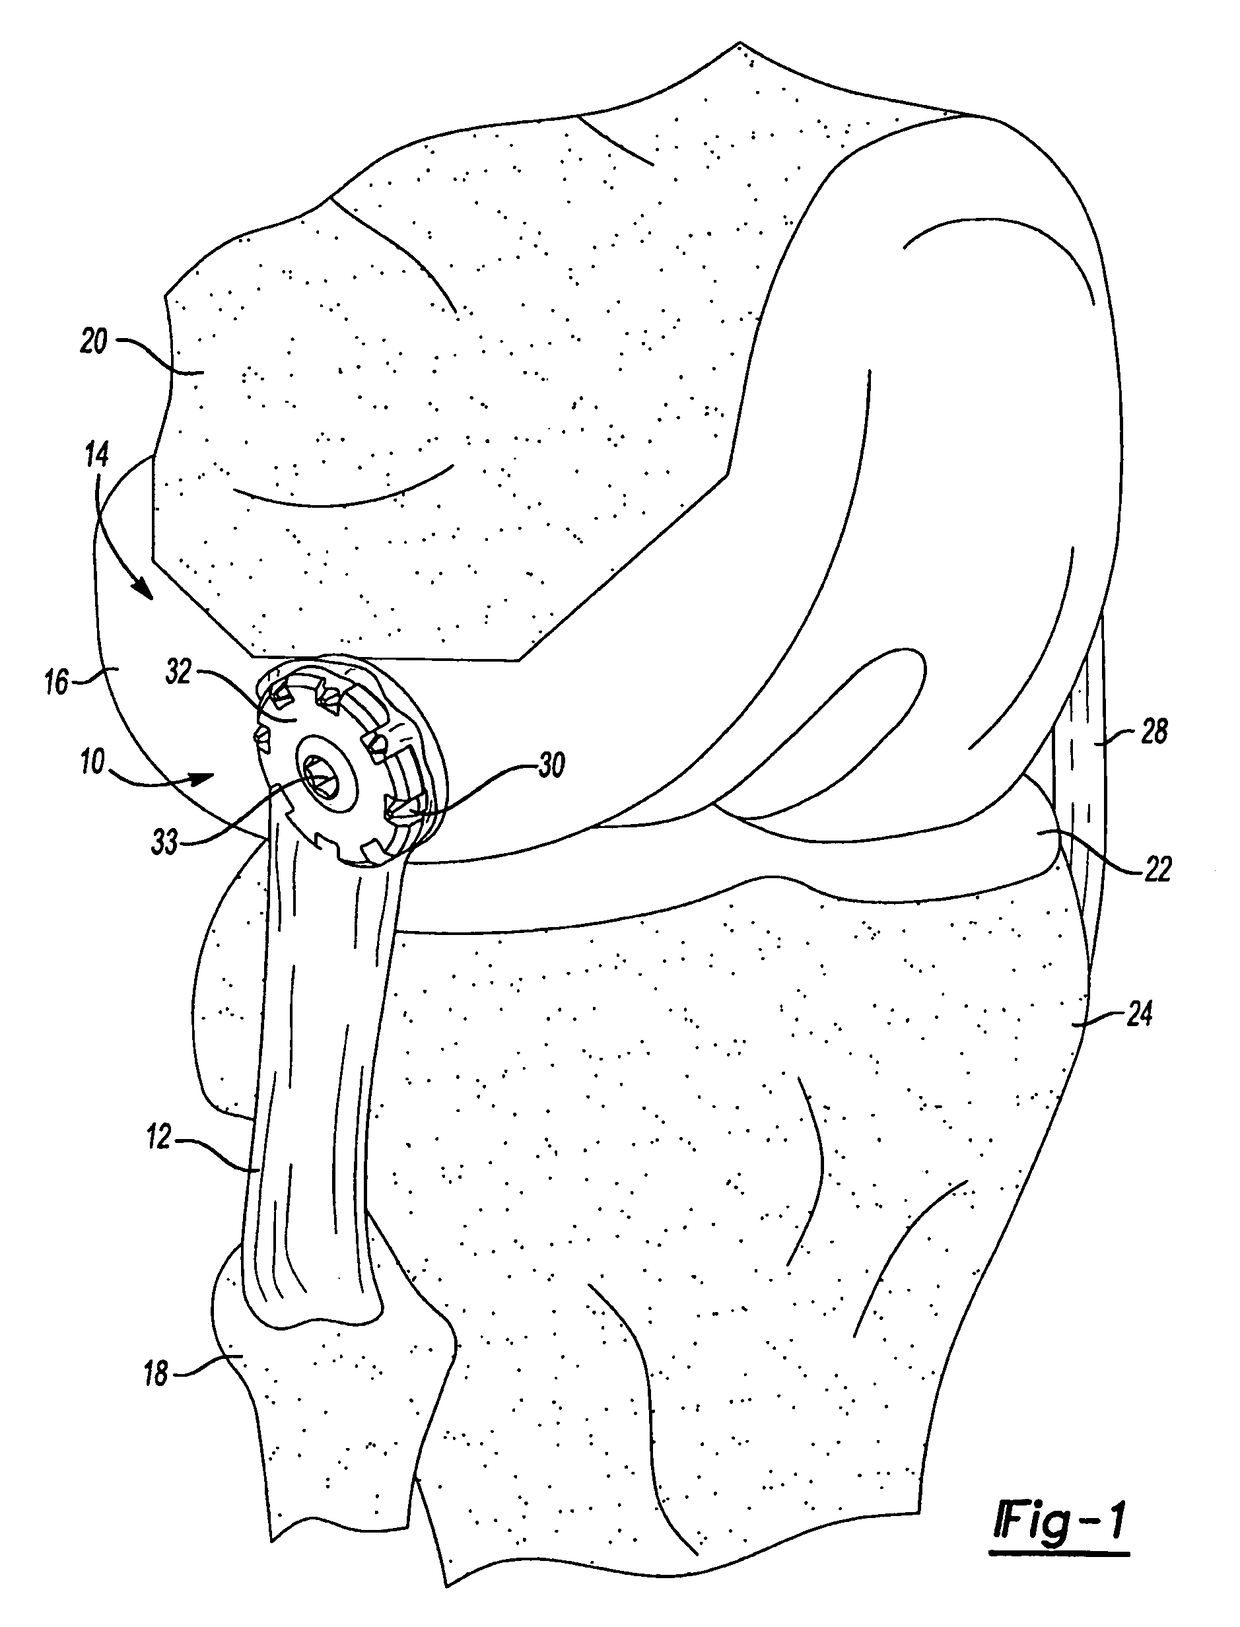 Method and apparatus for attaching soft tissue to an implant